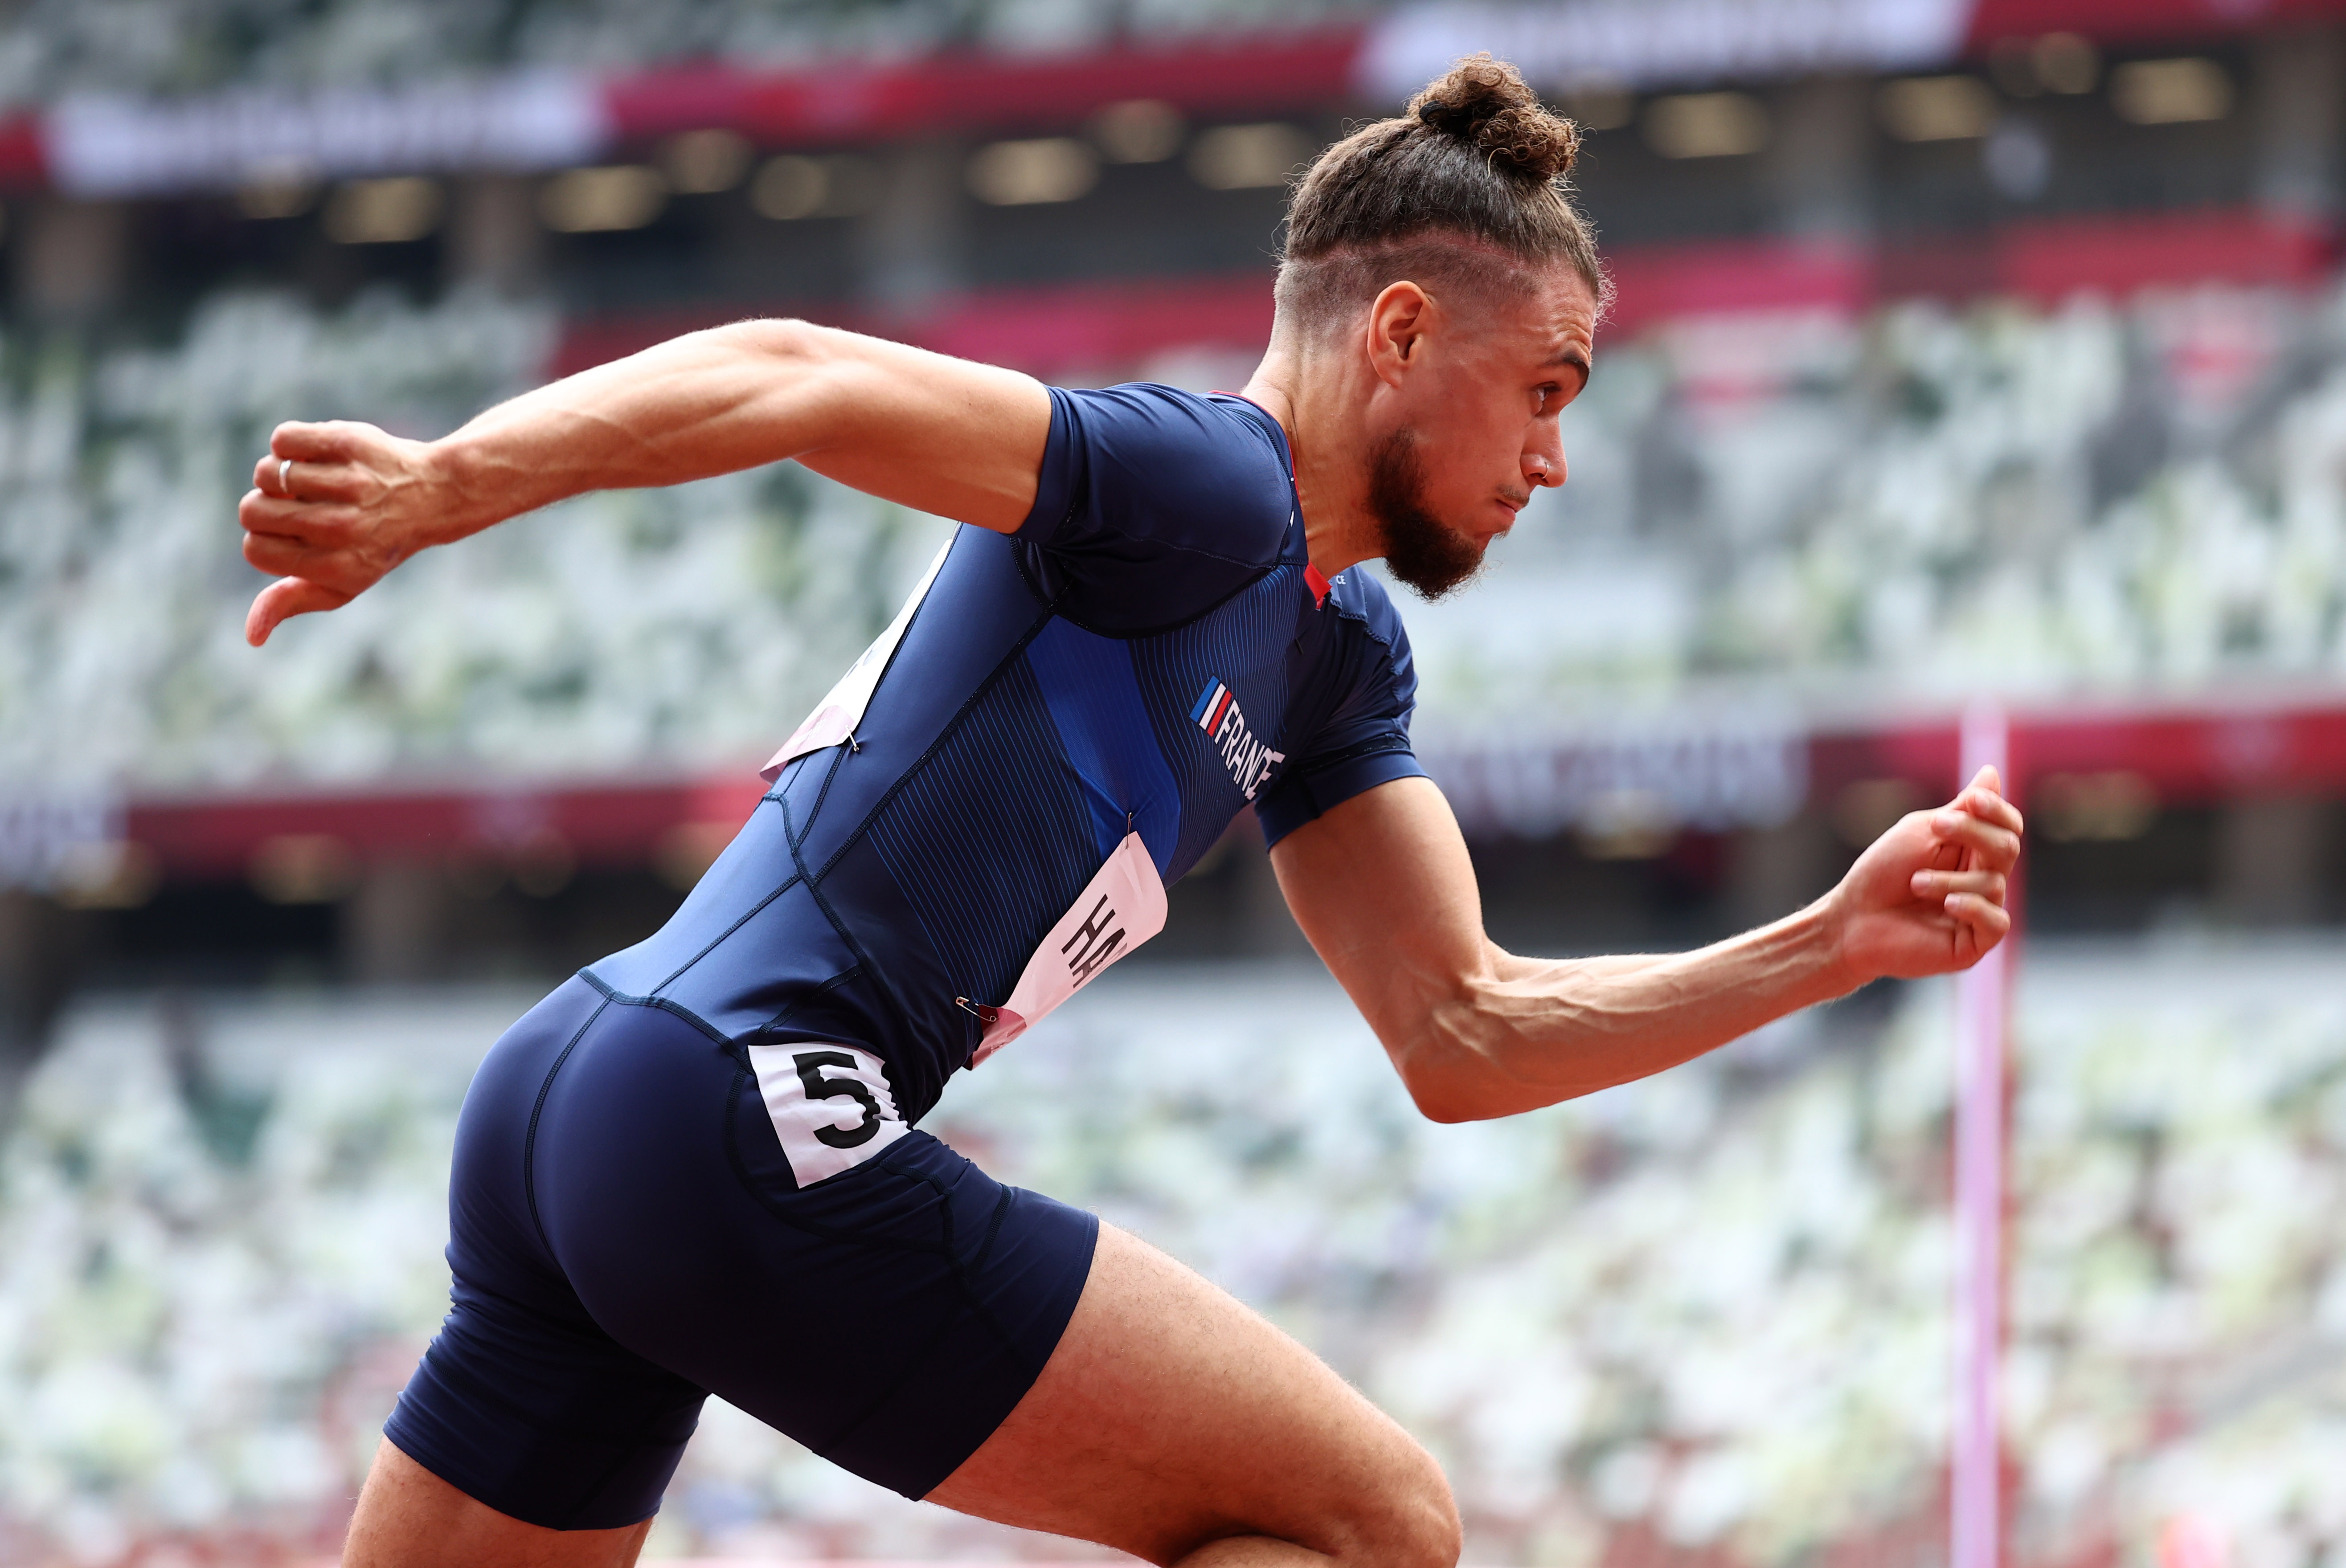 Tokyo 2020 Olympics - Athletics - Men's 400m Hurdles - Round 1 - OLS - Olympic Stadium, Tokyo, Japan - July 30, 2021. Wilfried Happio of France in action REUTERS/Lucy Nicholson